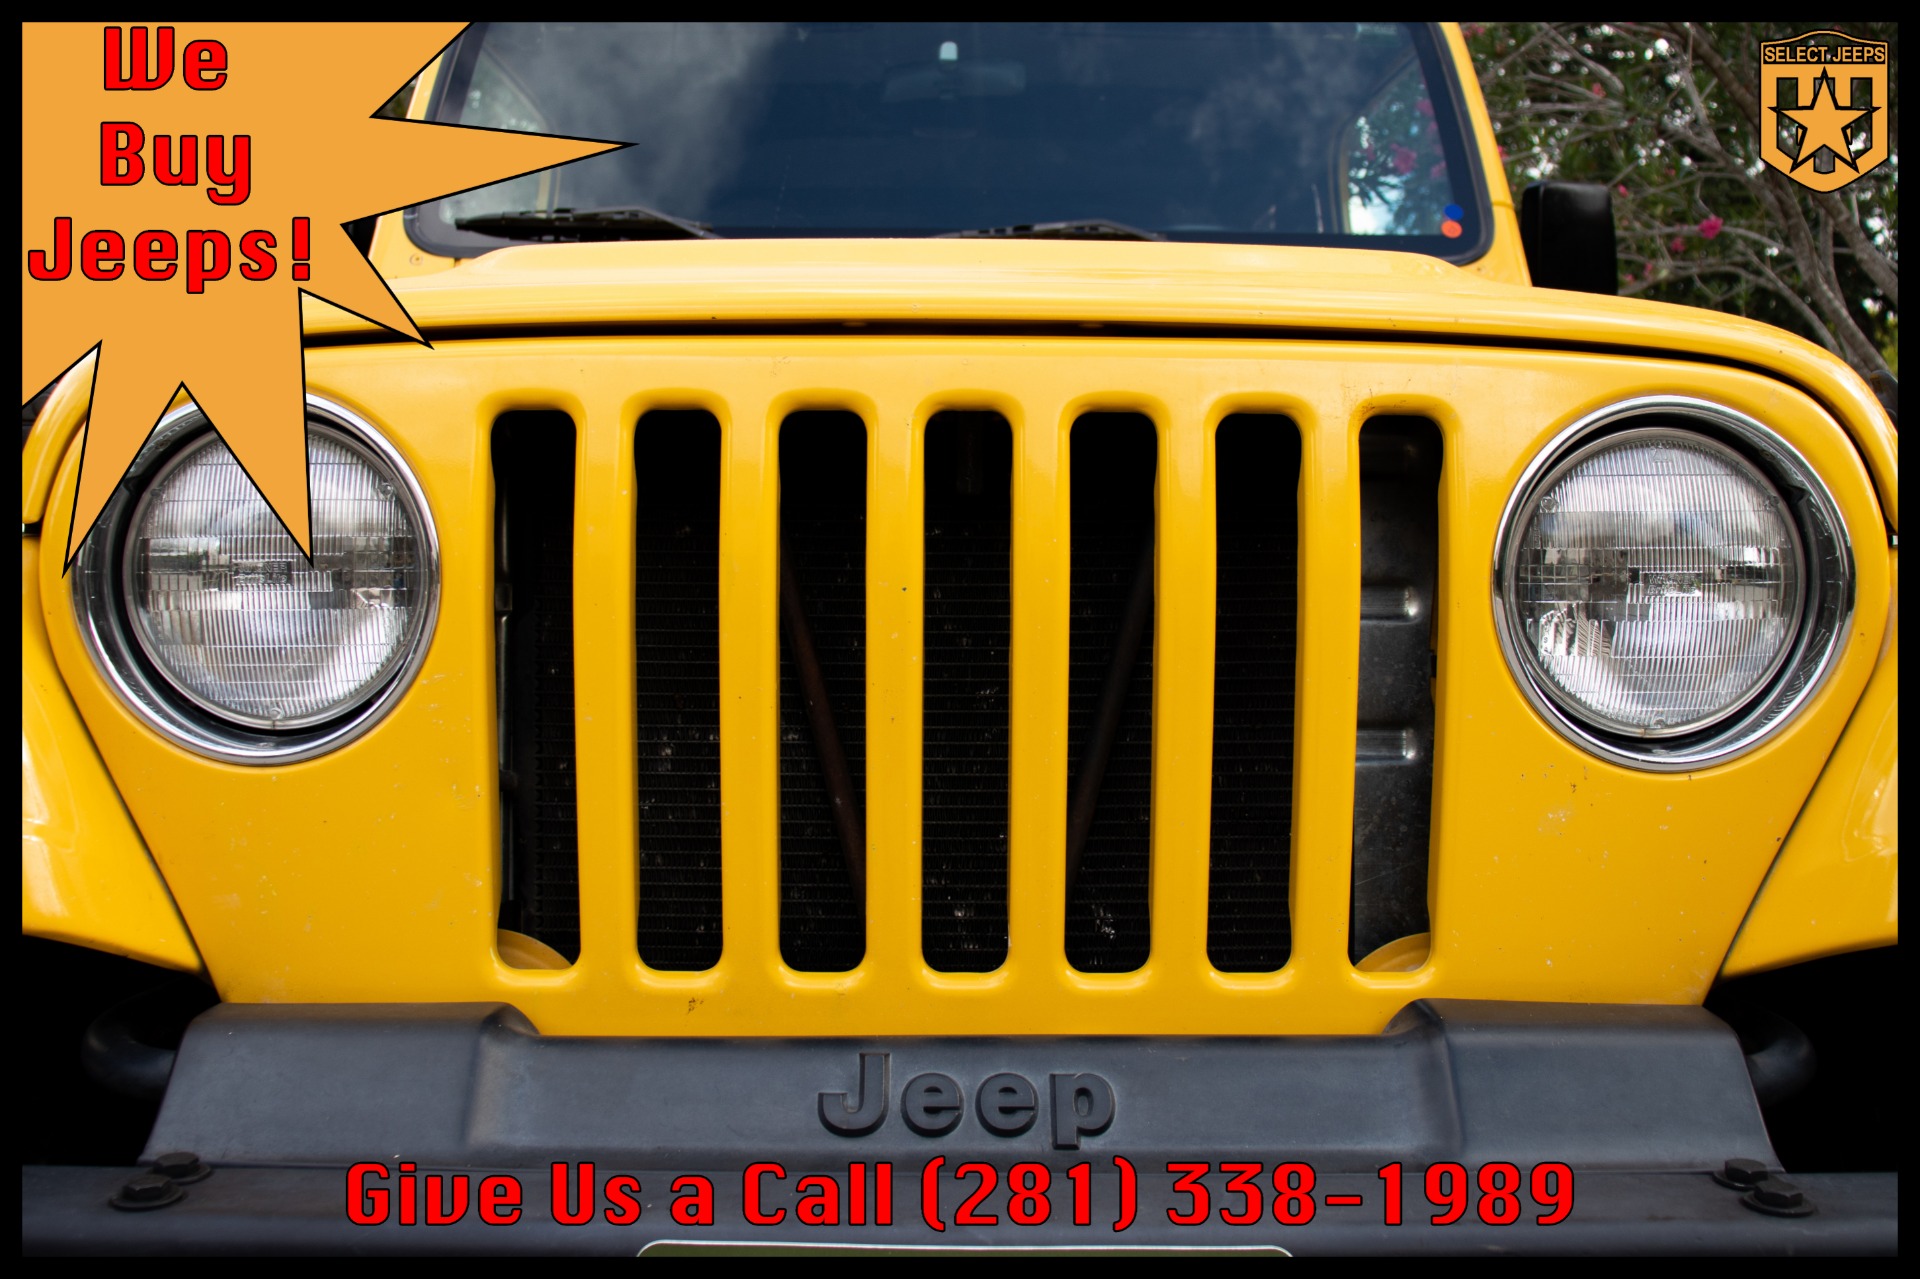 Used 2001 Jeep Wrangler Sport For Sale ($13,995) | Select Jeeps Inc. Stock  #344646